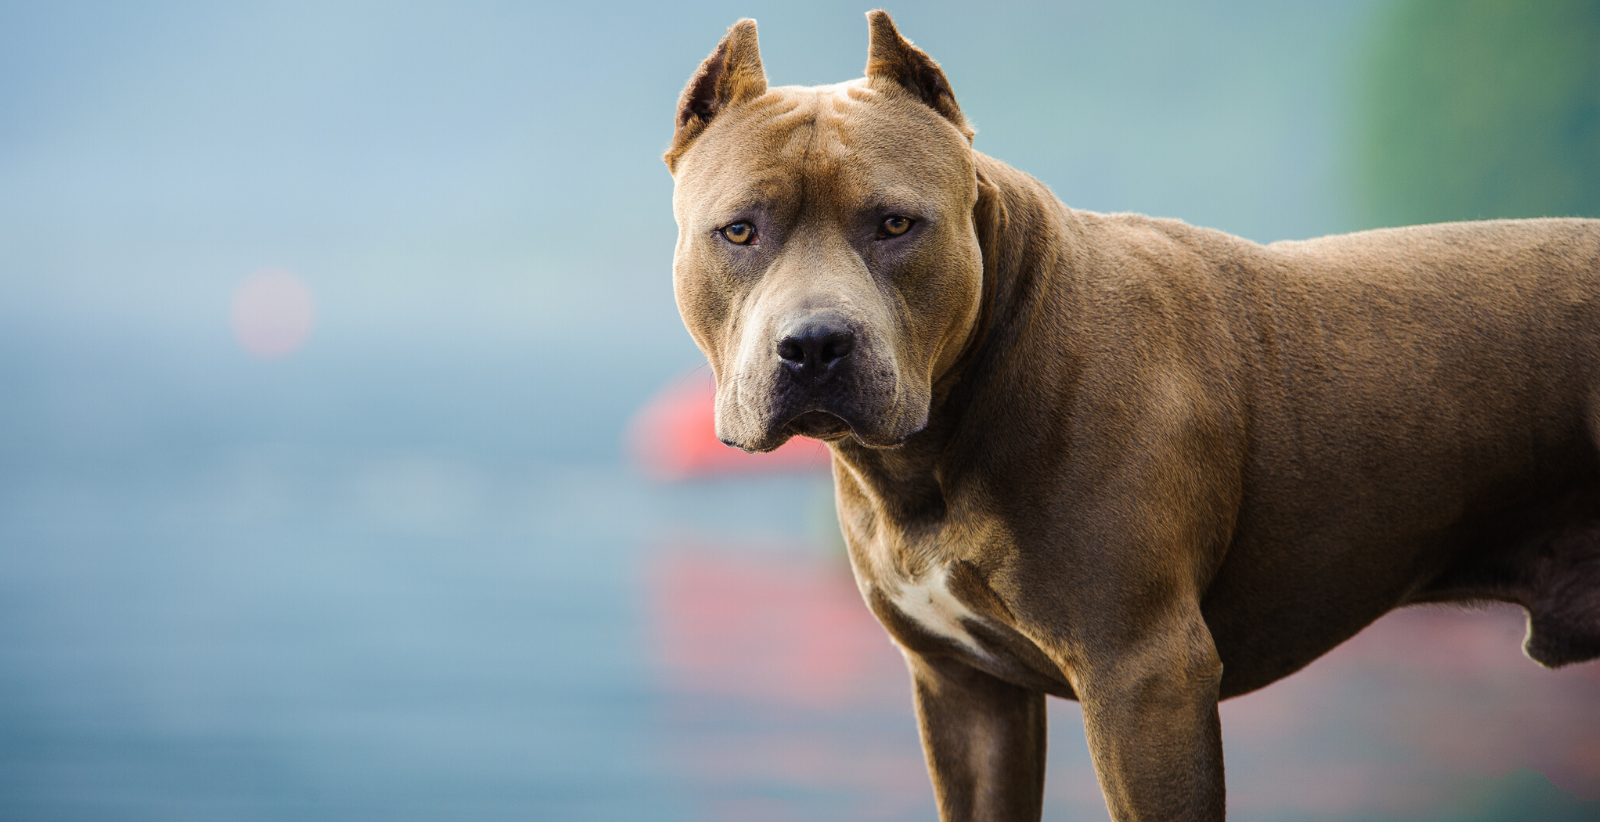 Pit Bull-Type Dogs: Strong, Loyal, Arthritis Risk